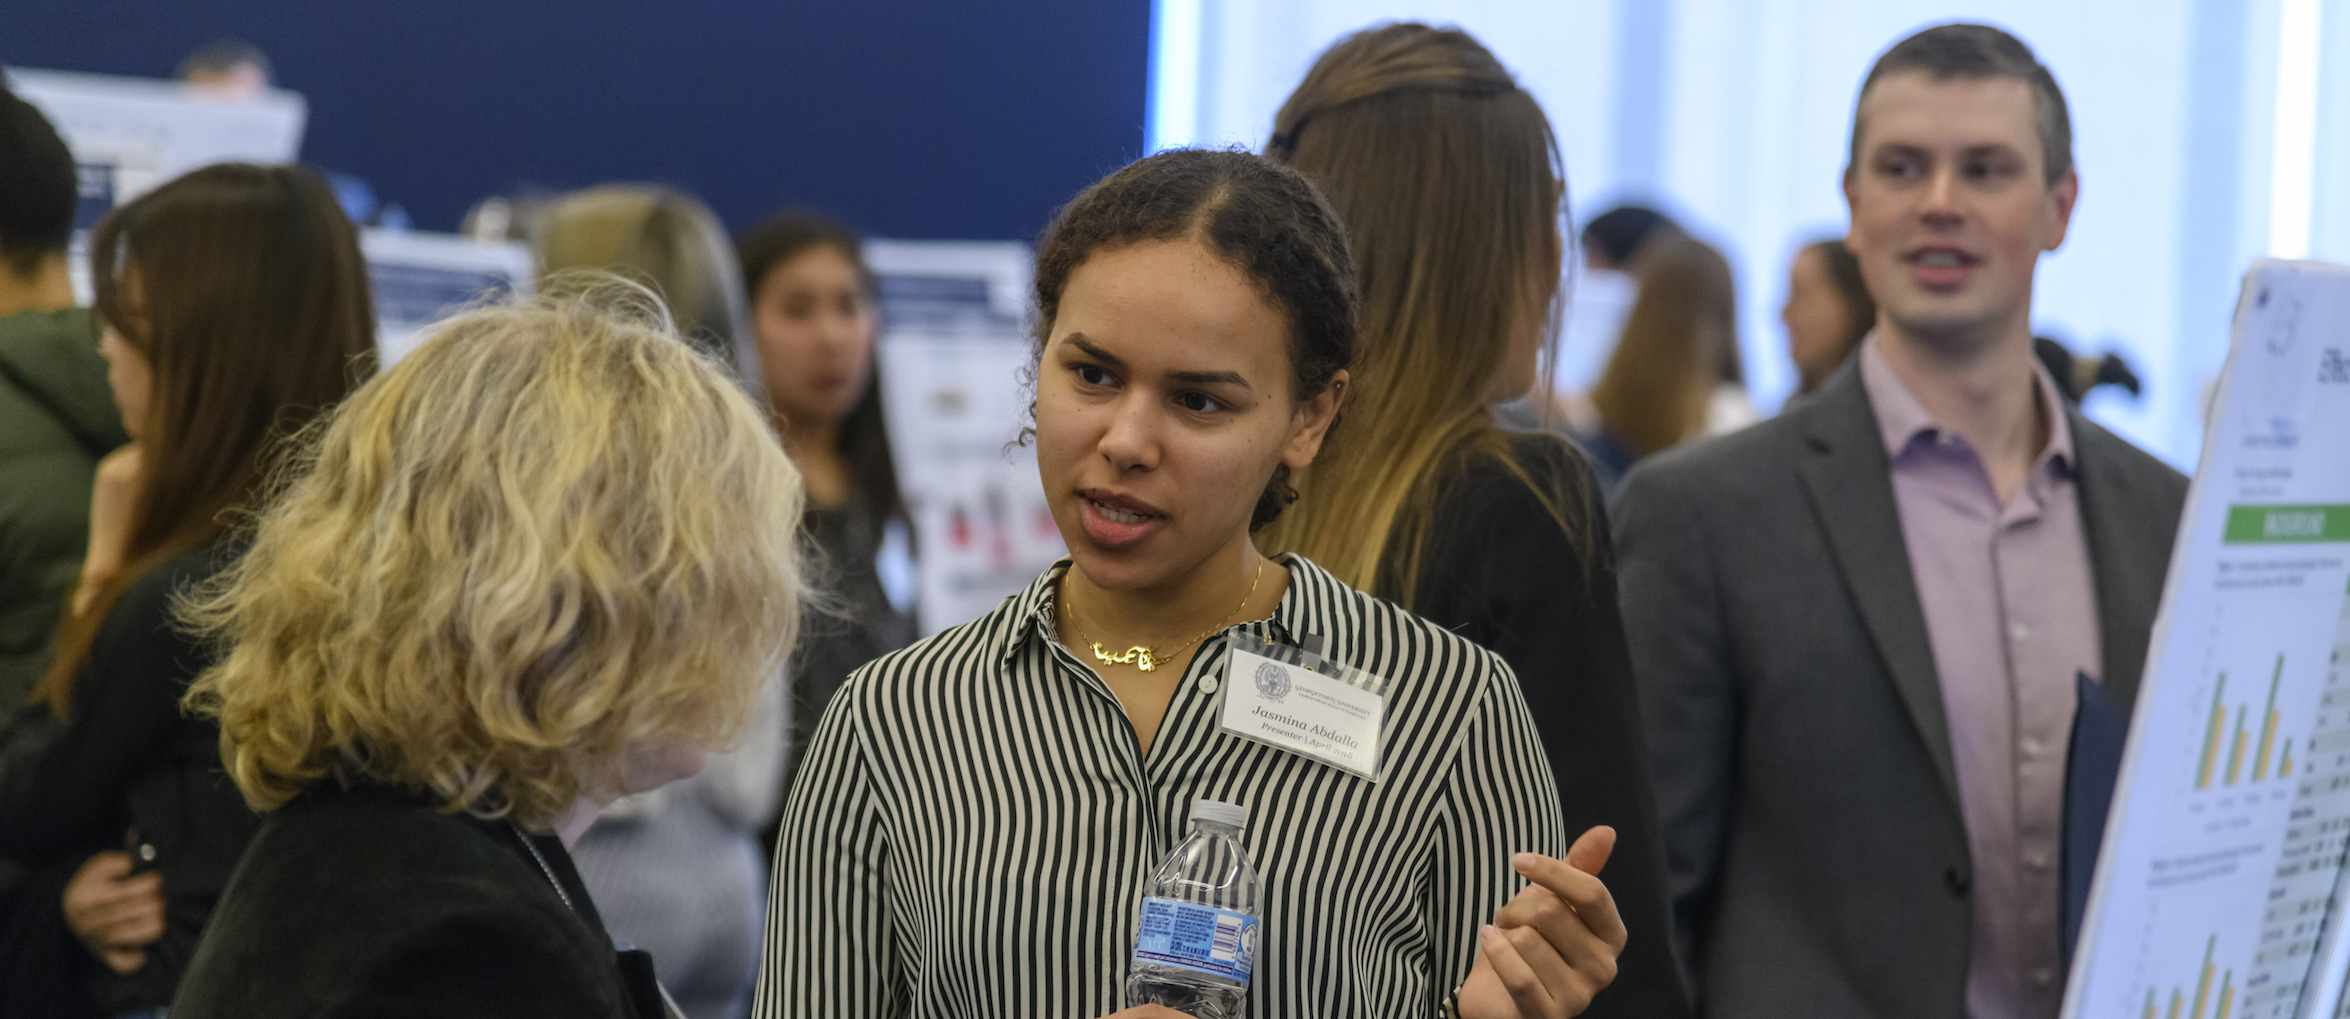 A student discusses her research with a conference attendee